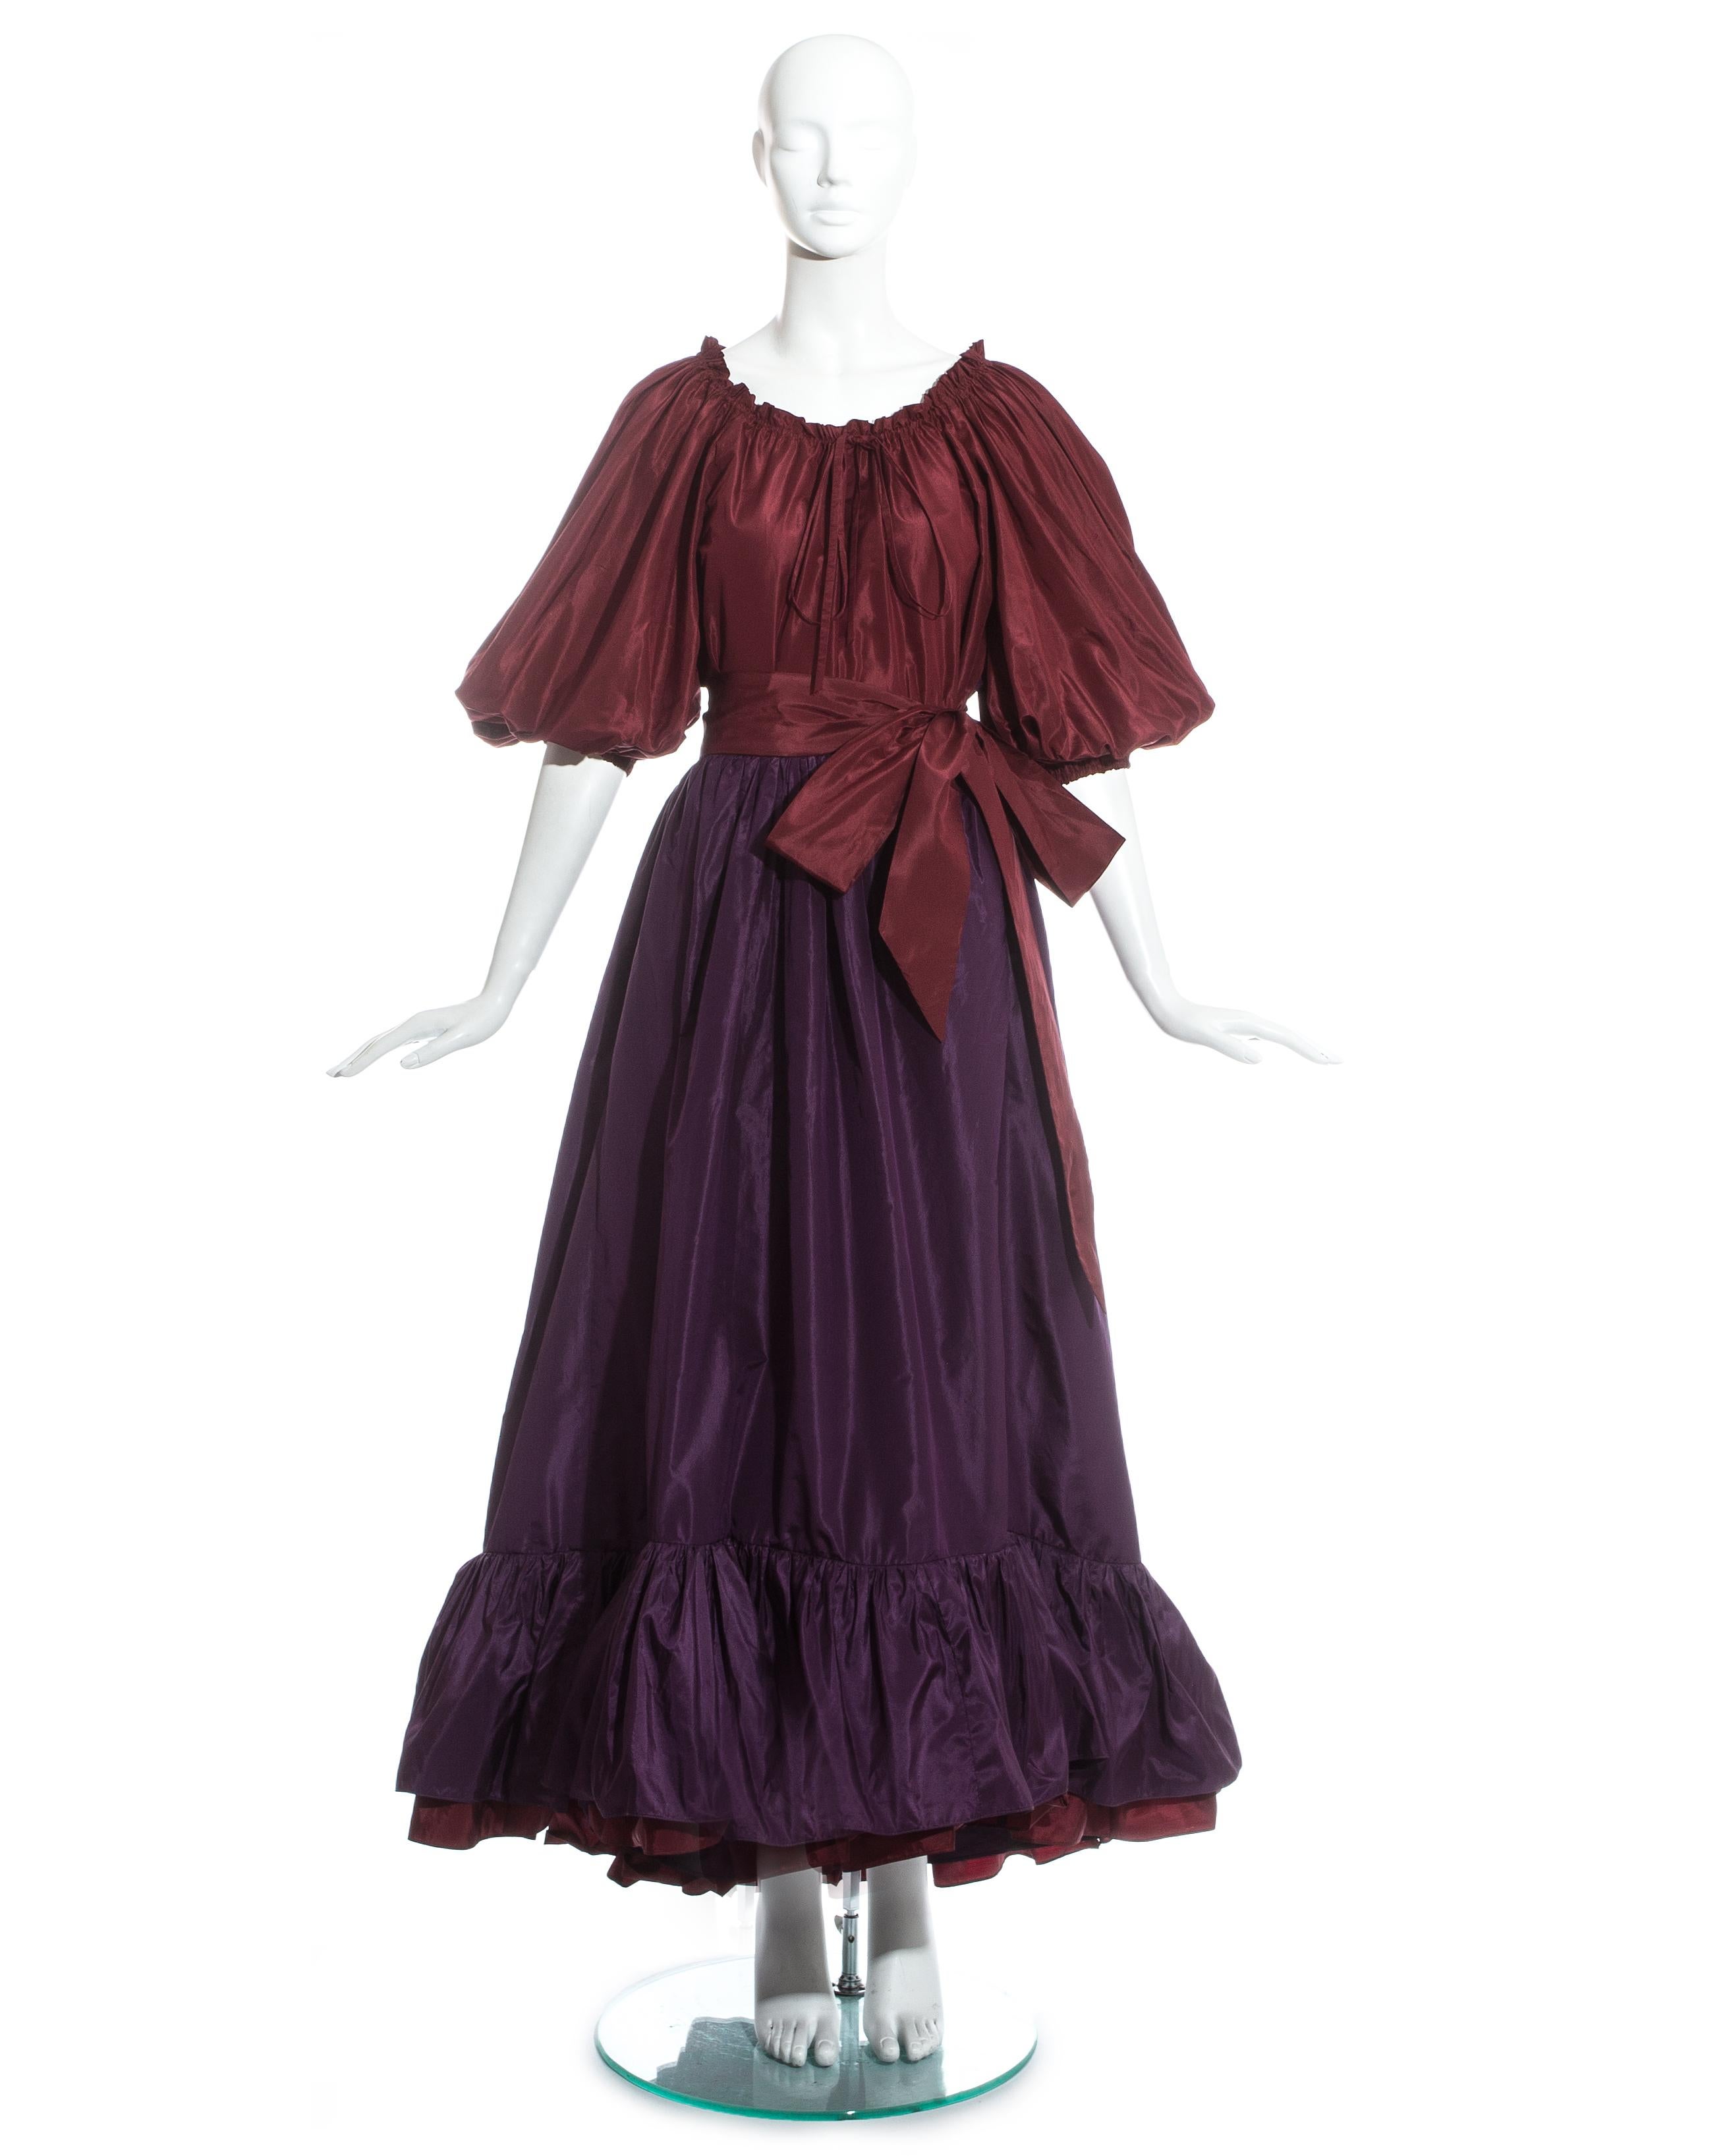 Yves Saint Laurent silk taffeta plum blouse and skirt evening ensemble. Blouse with drawstring collar, bow fastening, and balloon sleeves with elasticated cuff.  High waisted tiered plum skirt fastening with a long ribbon, pleated under skirt and